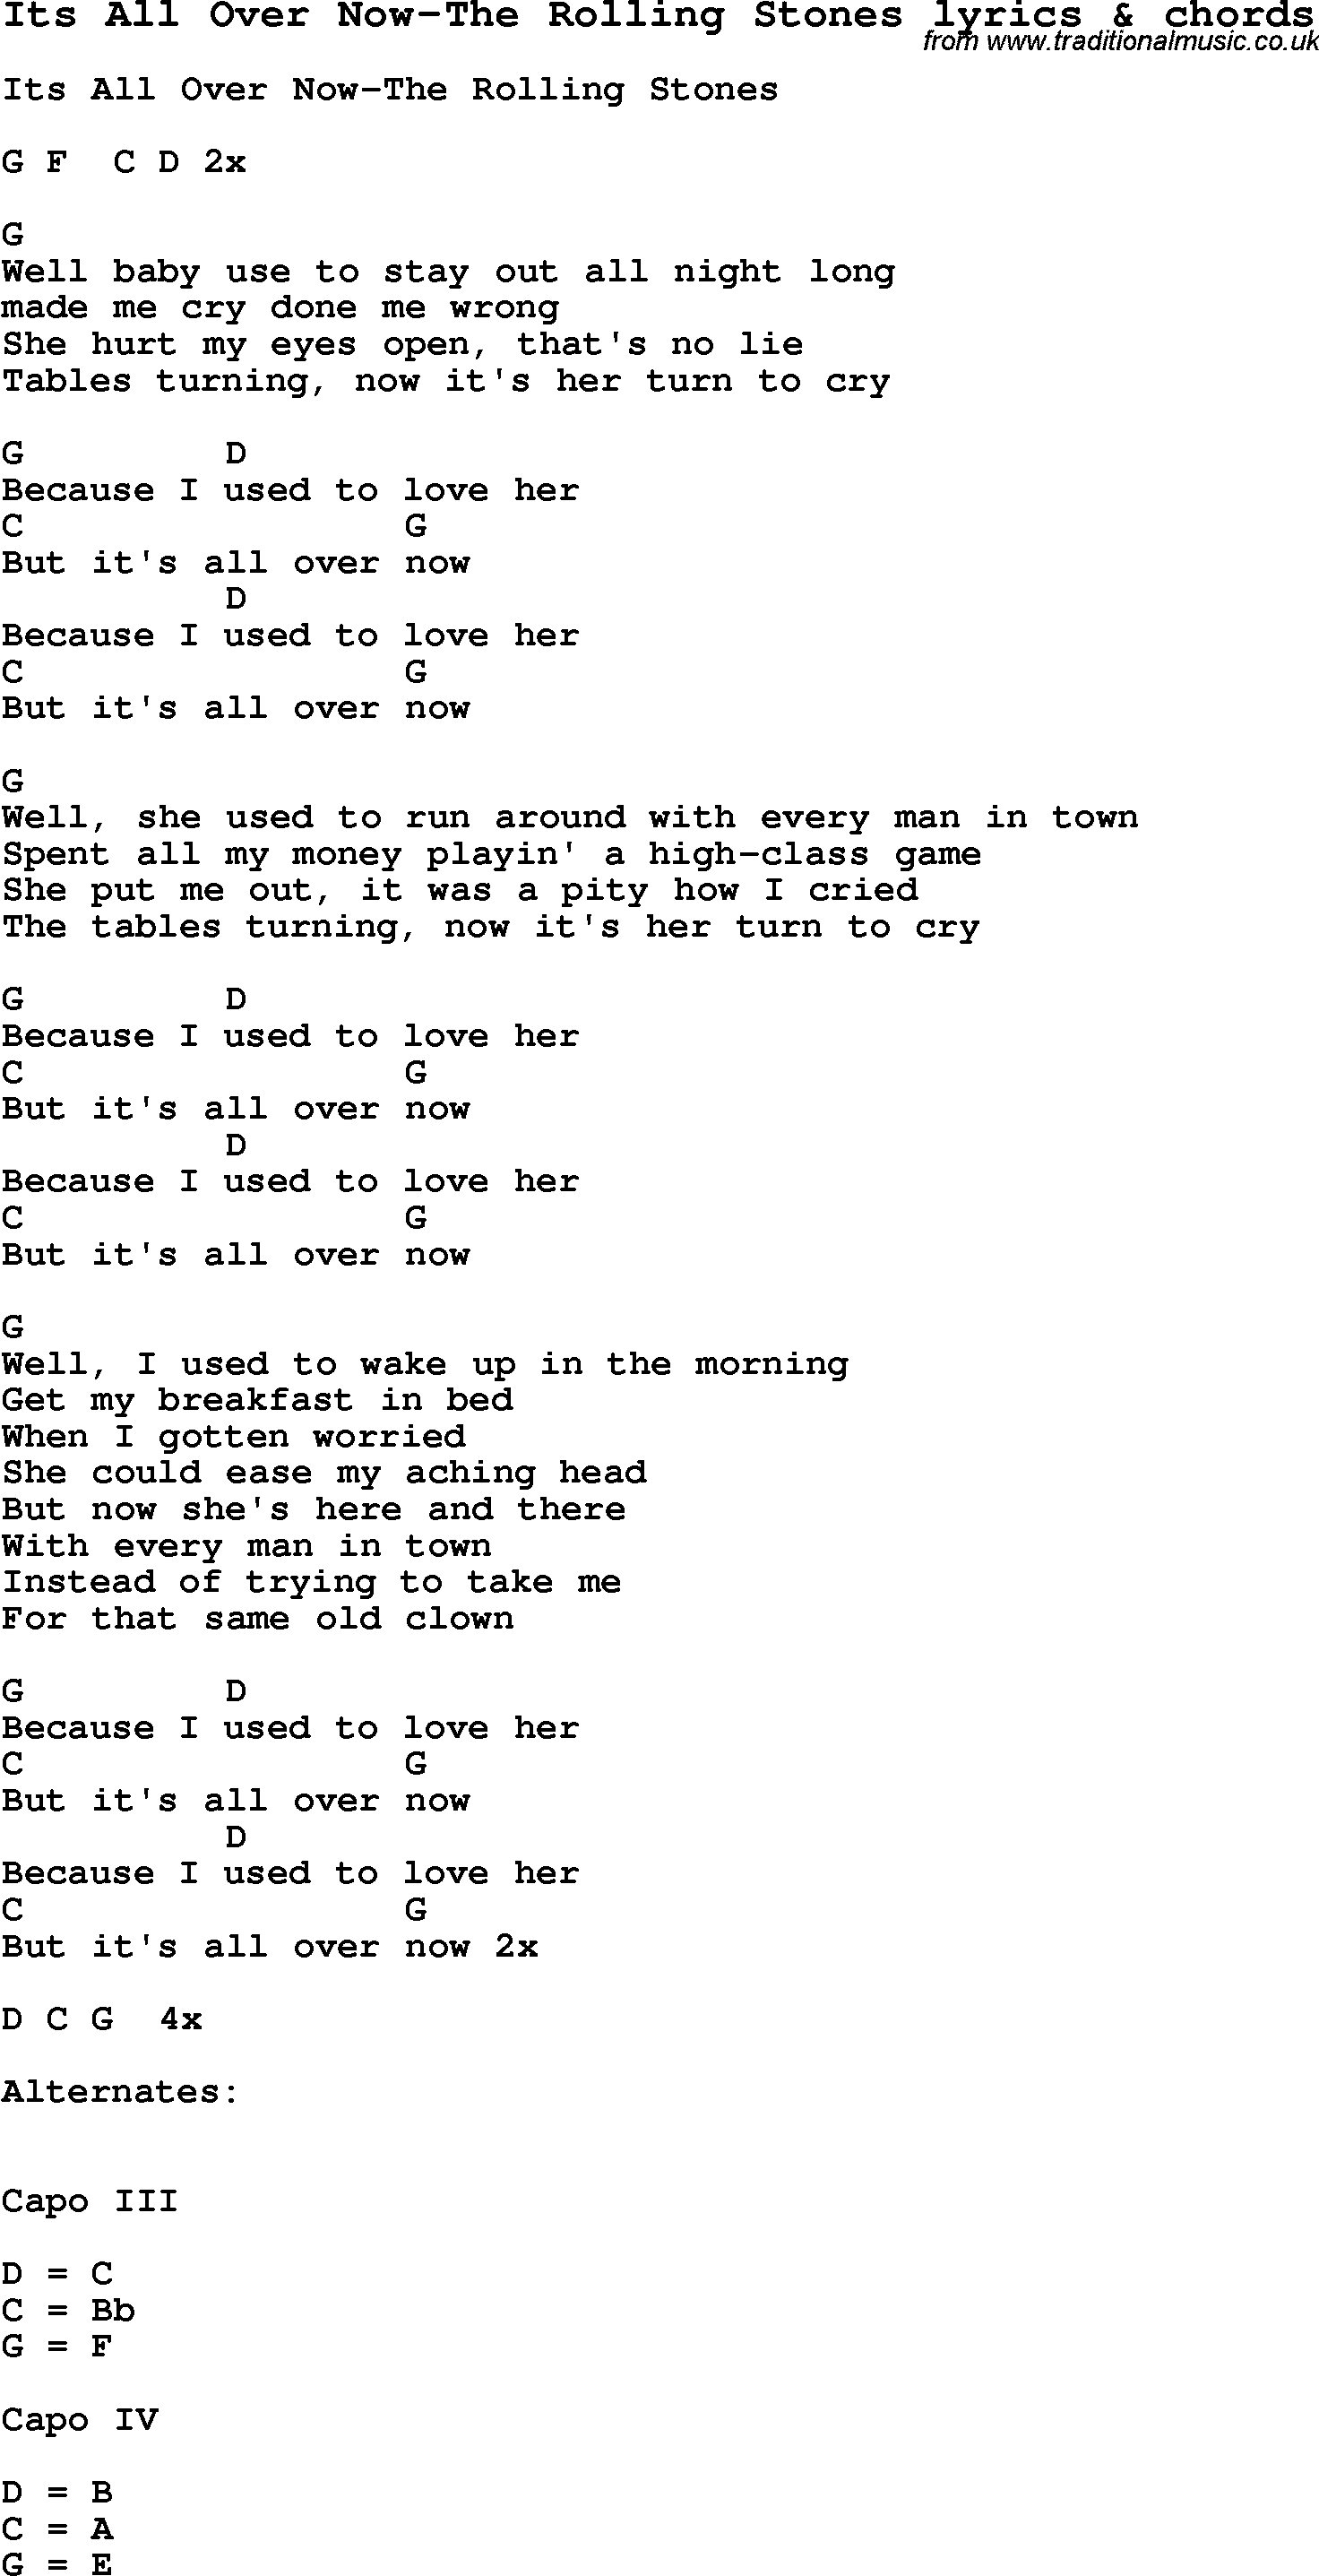 Love Song Lyrics for: Its All Over Now-The Rolling Stones with chords for Ukulele, Guitar Banjo etc.